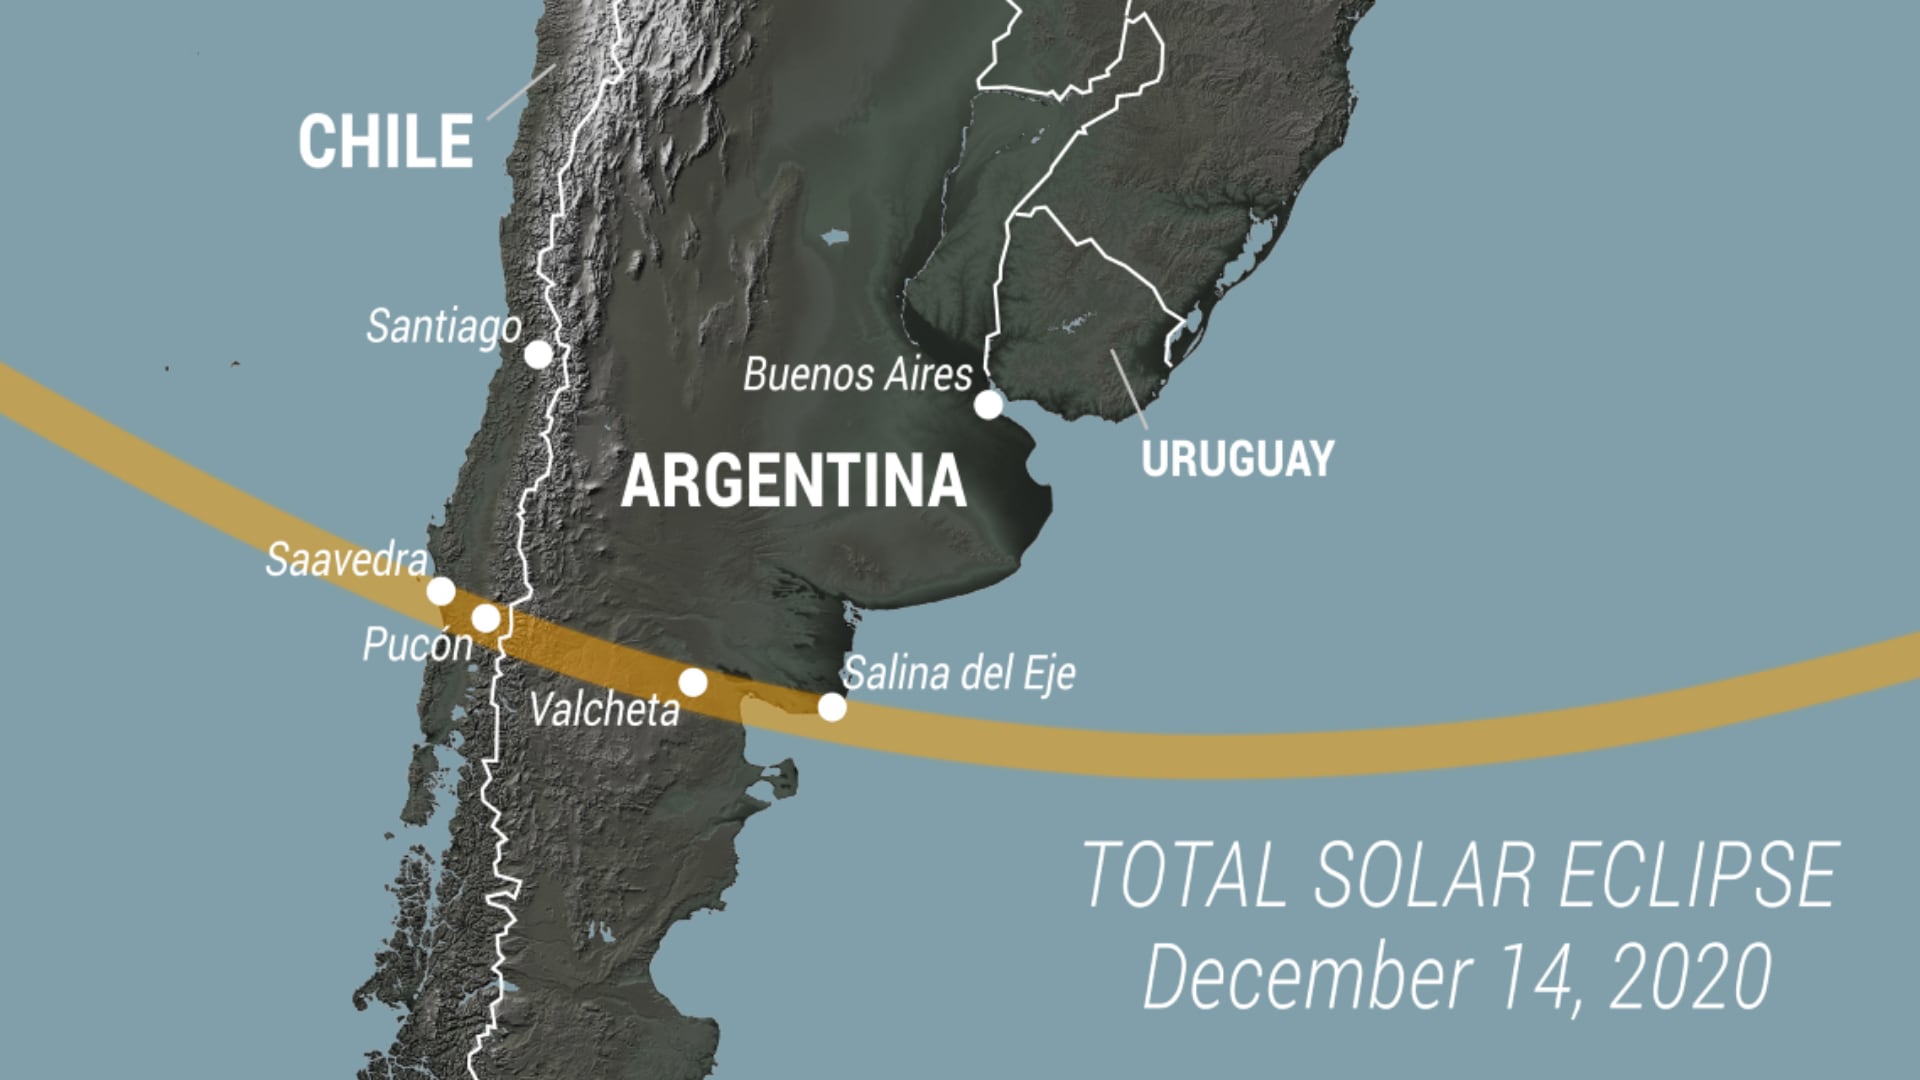 A total solar eclipse will cross Chile and Argentina on Dec. 14, 2020. Image courtesy of the National Aeronautics and Space Administration (NASA).